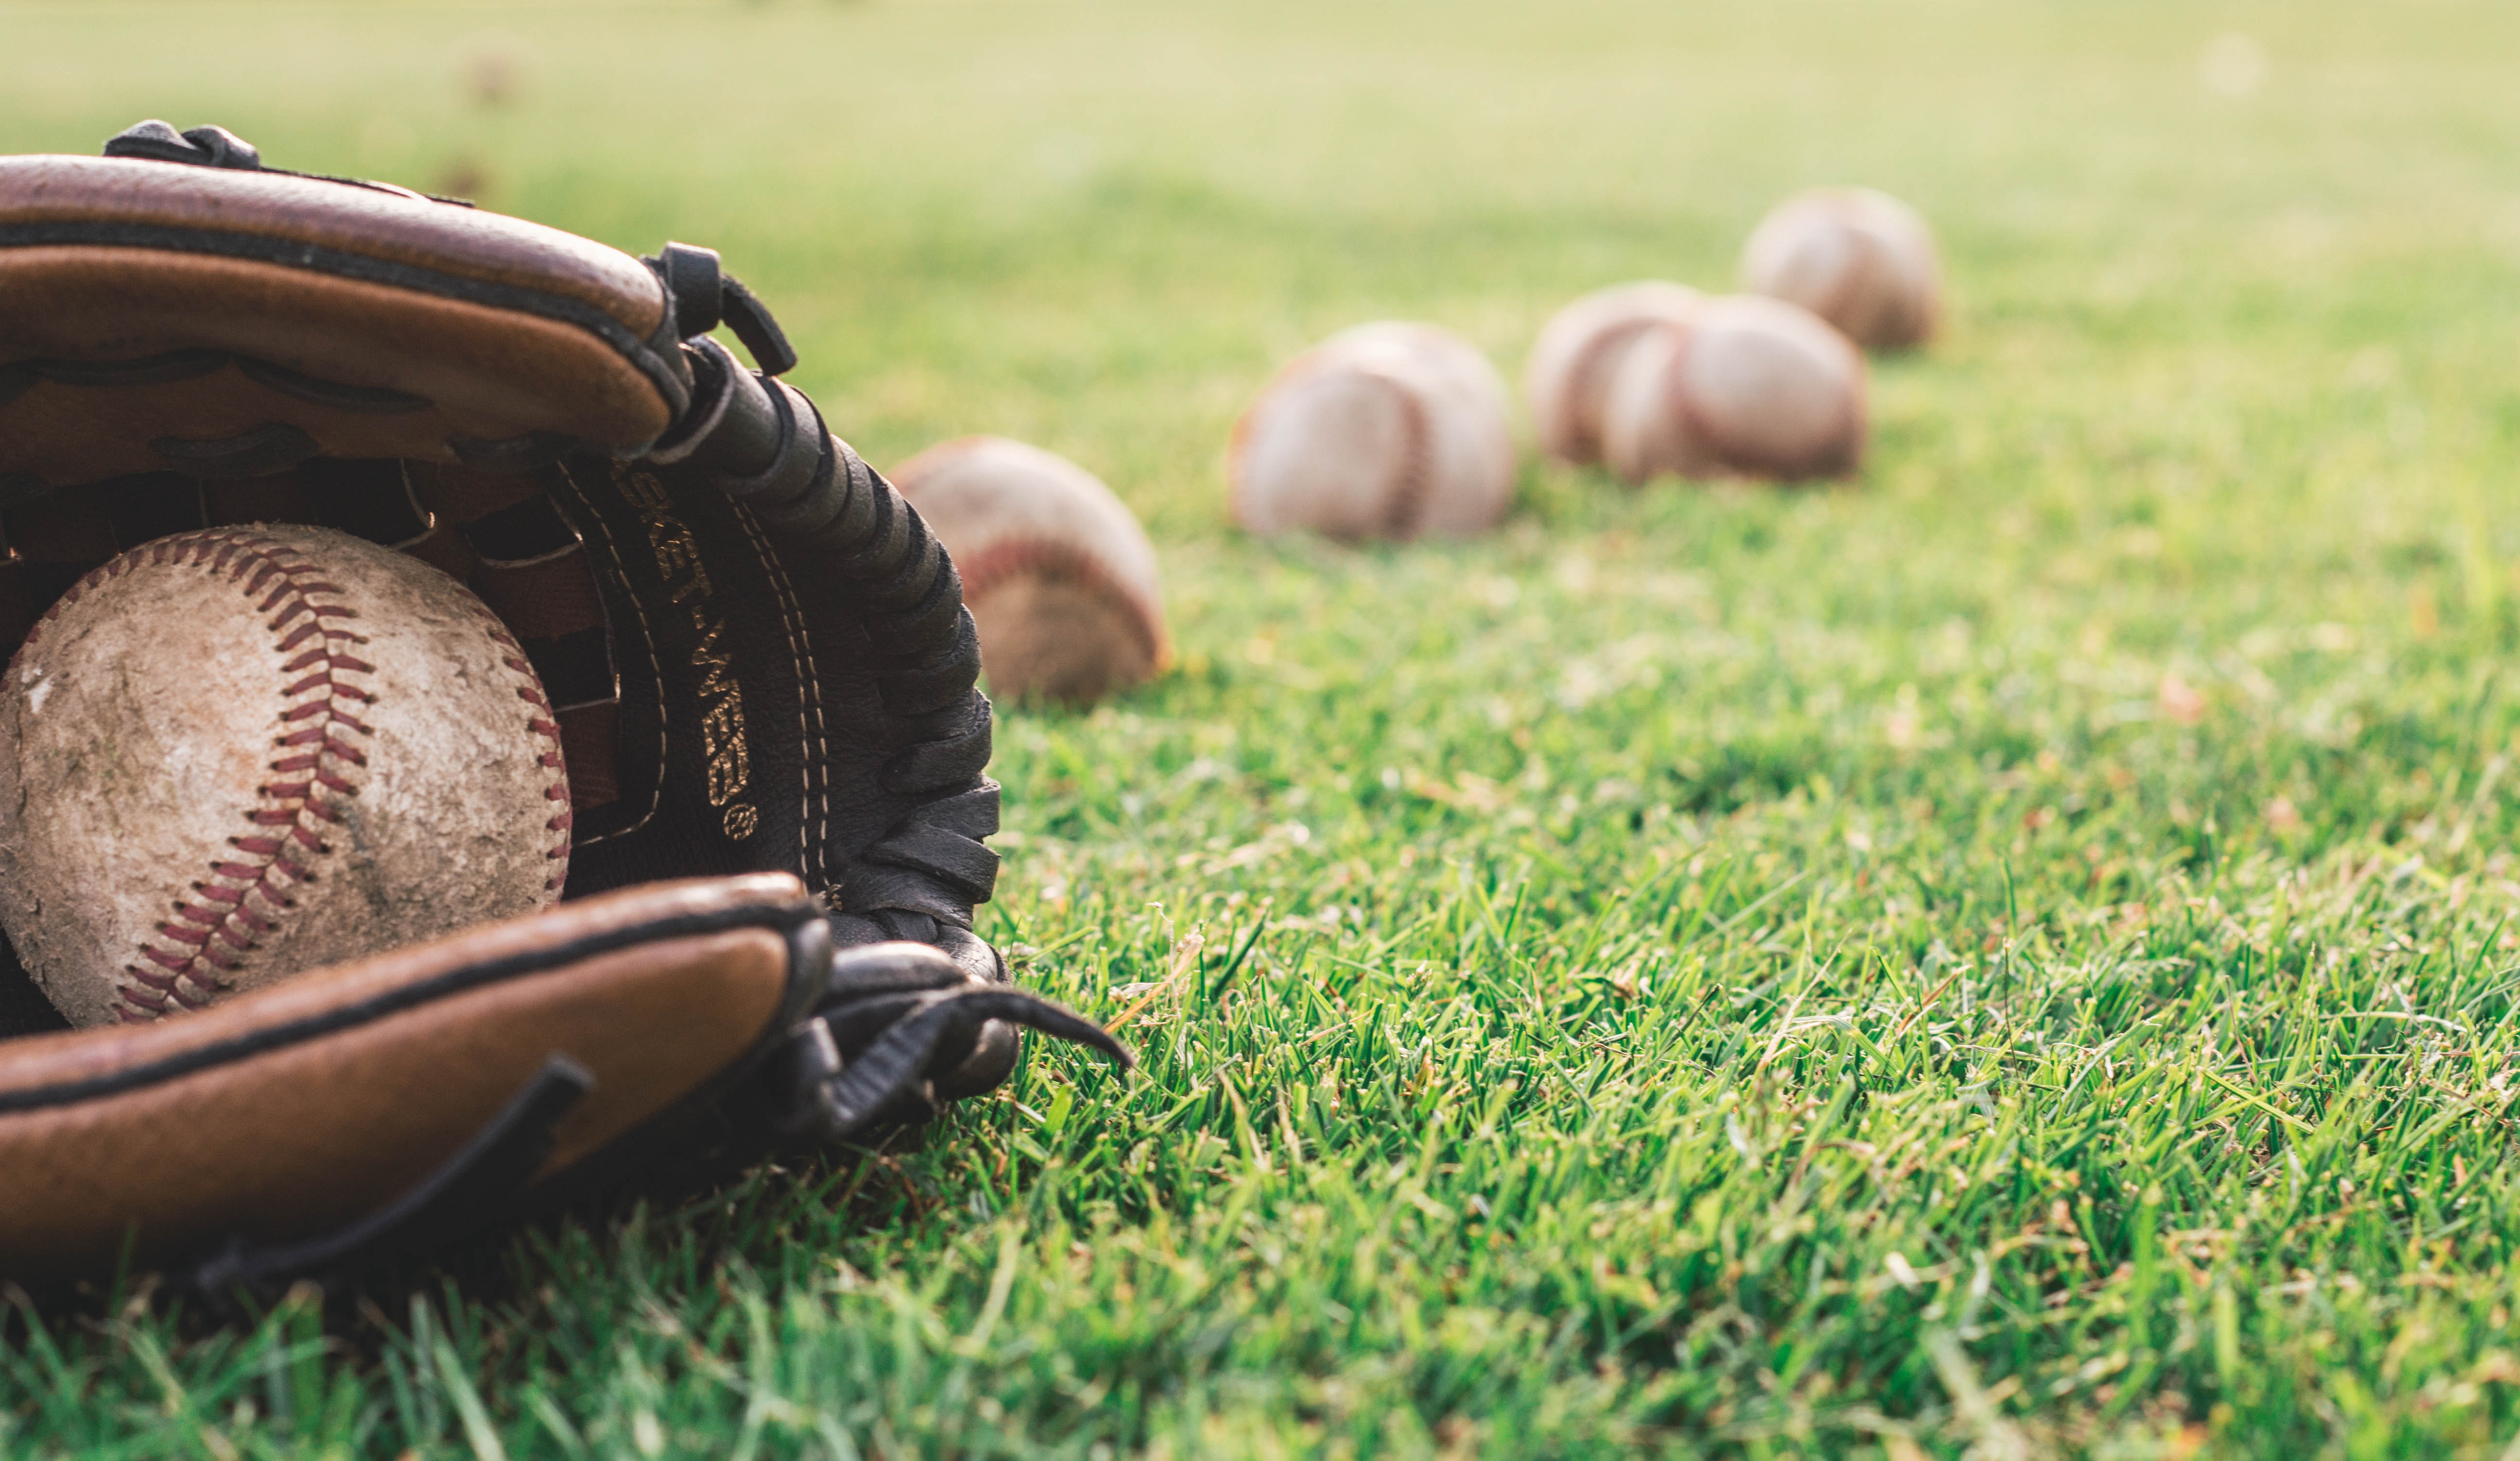 Baseball in baseball glove laying on grass in the foreground with 5 balls in the background.